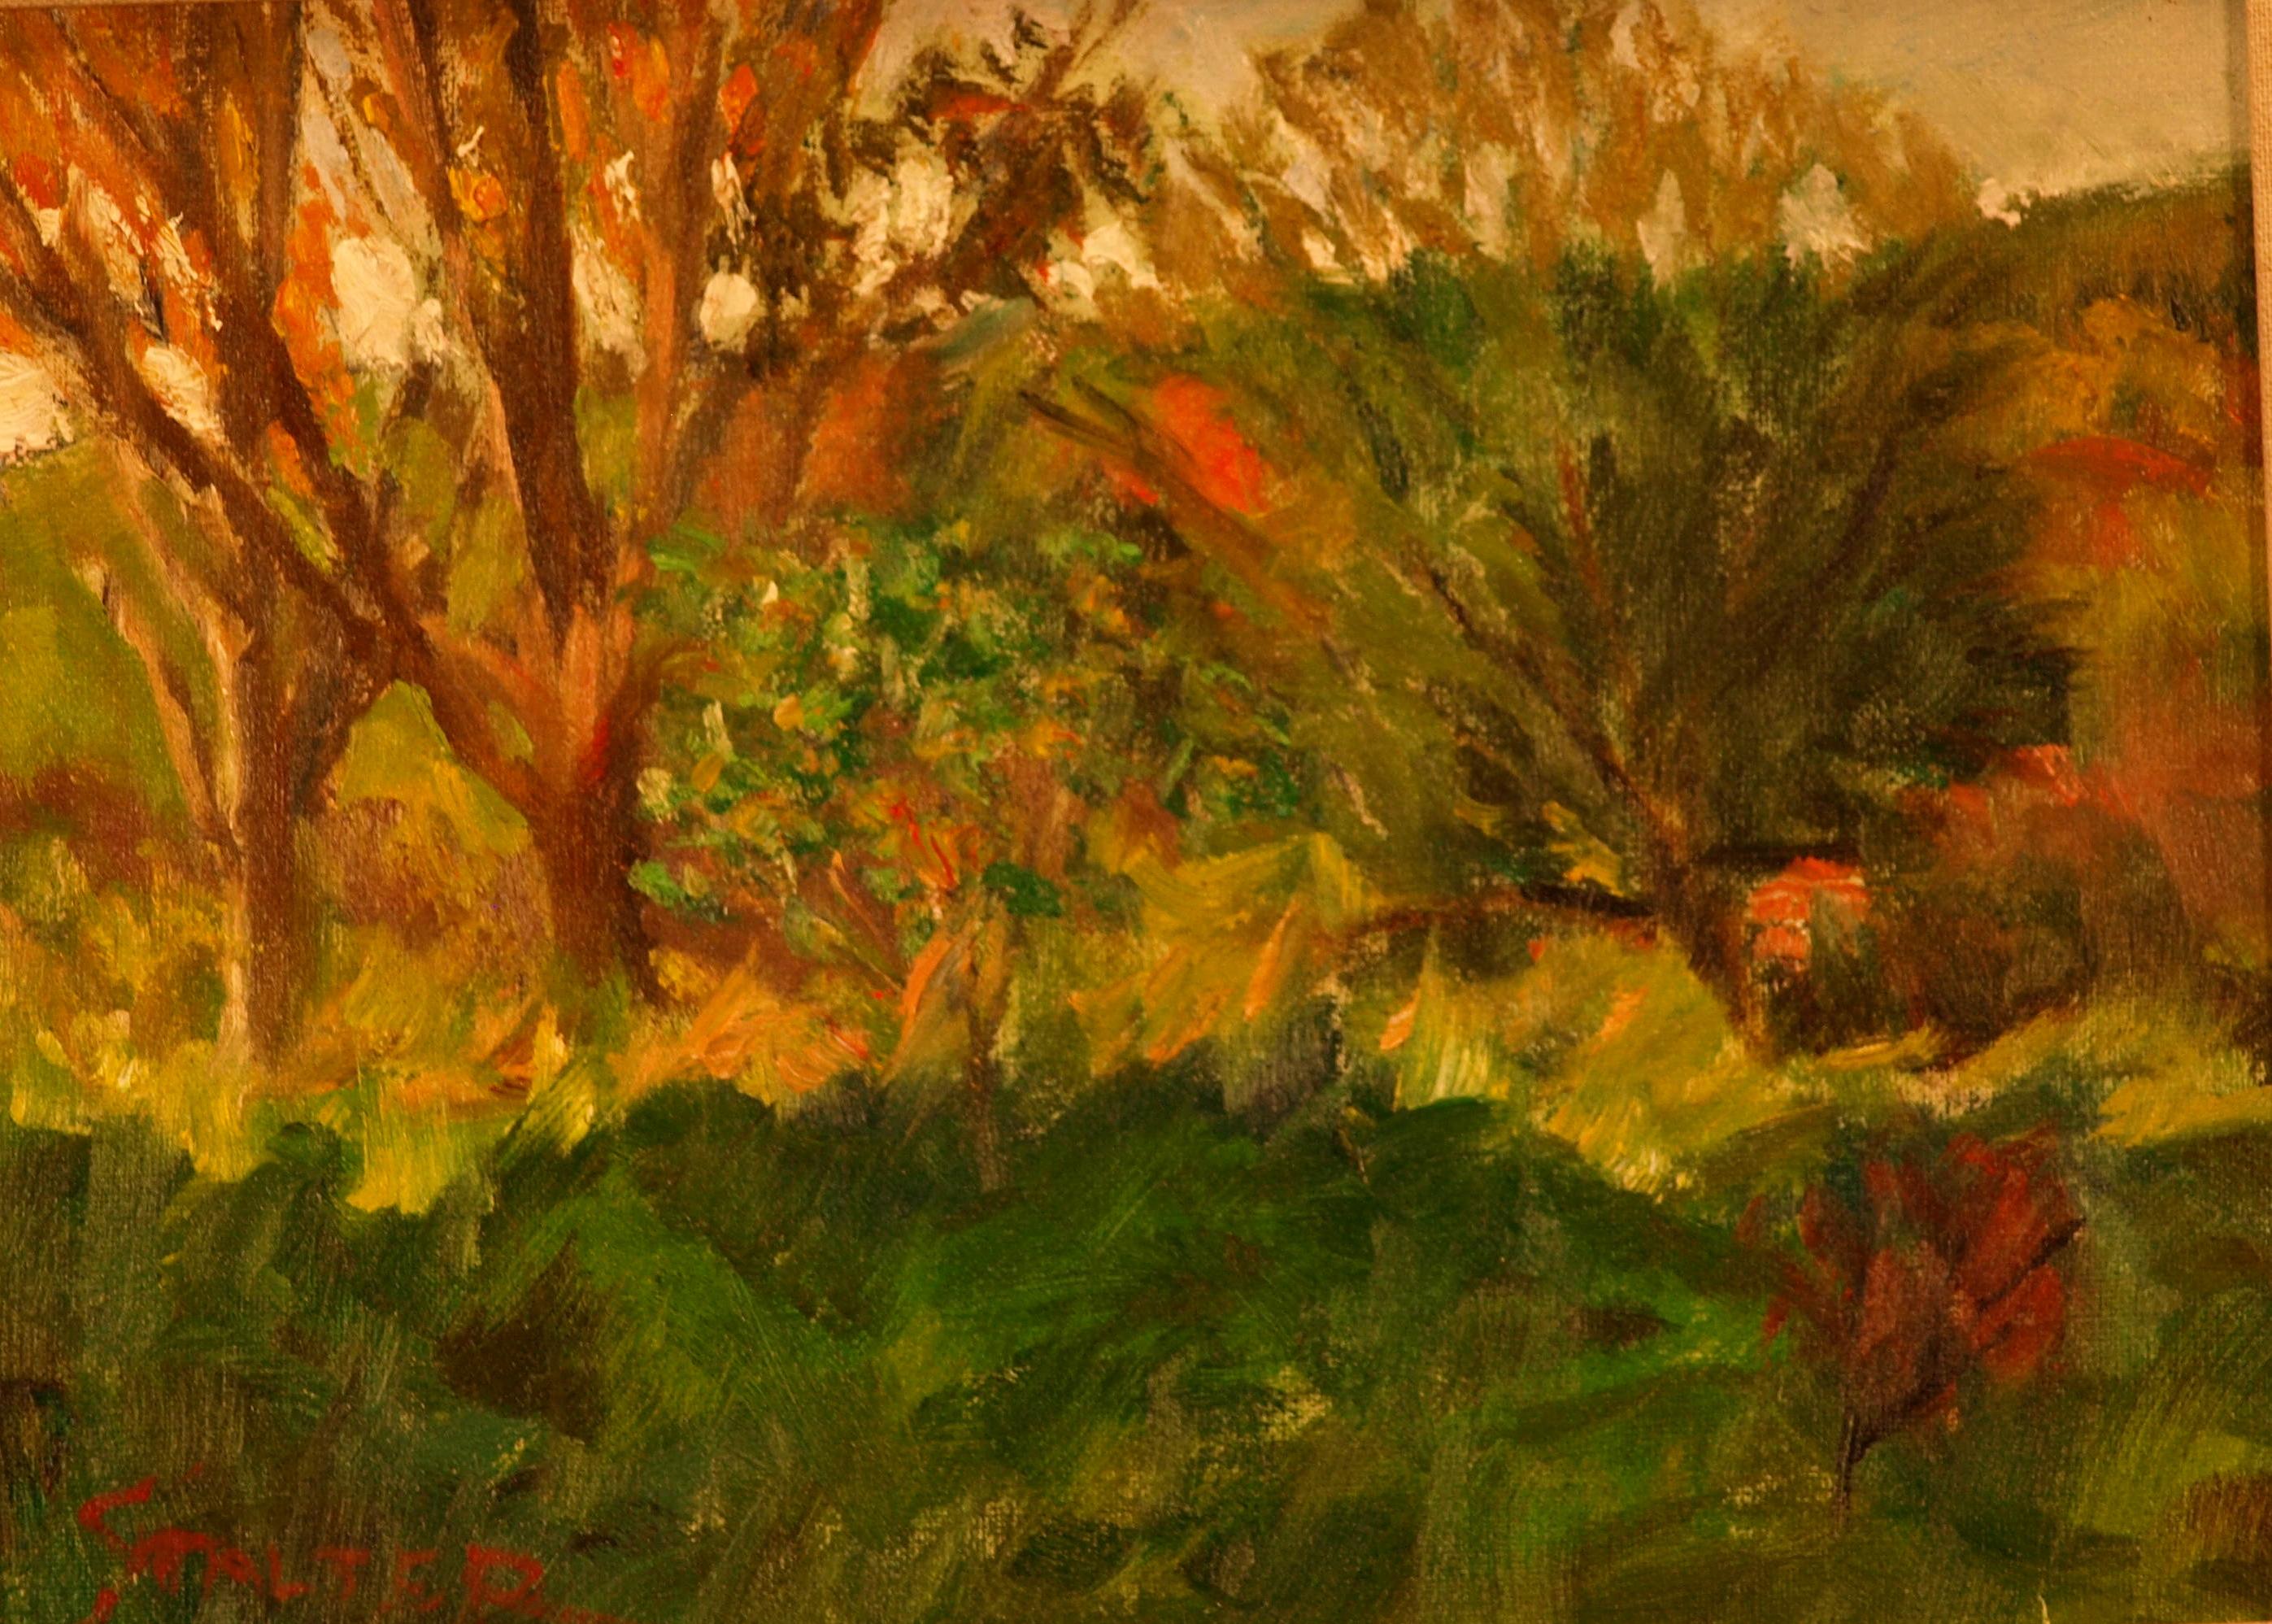 Bright Sun and Shadow, Oil on Canvas on Panel, 9 x 12 Inches, by Richard Stalter, $225